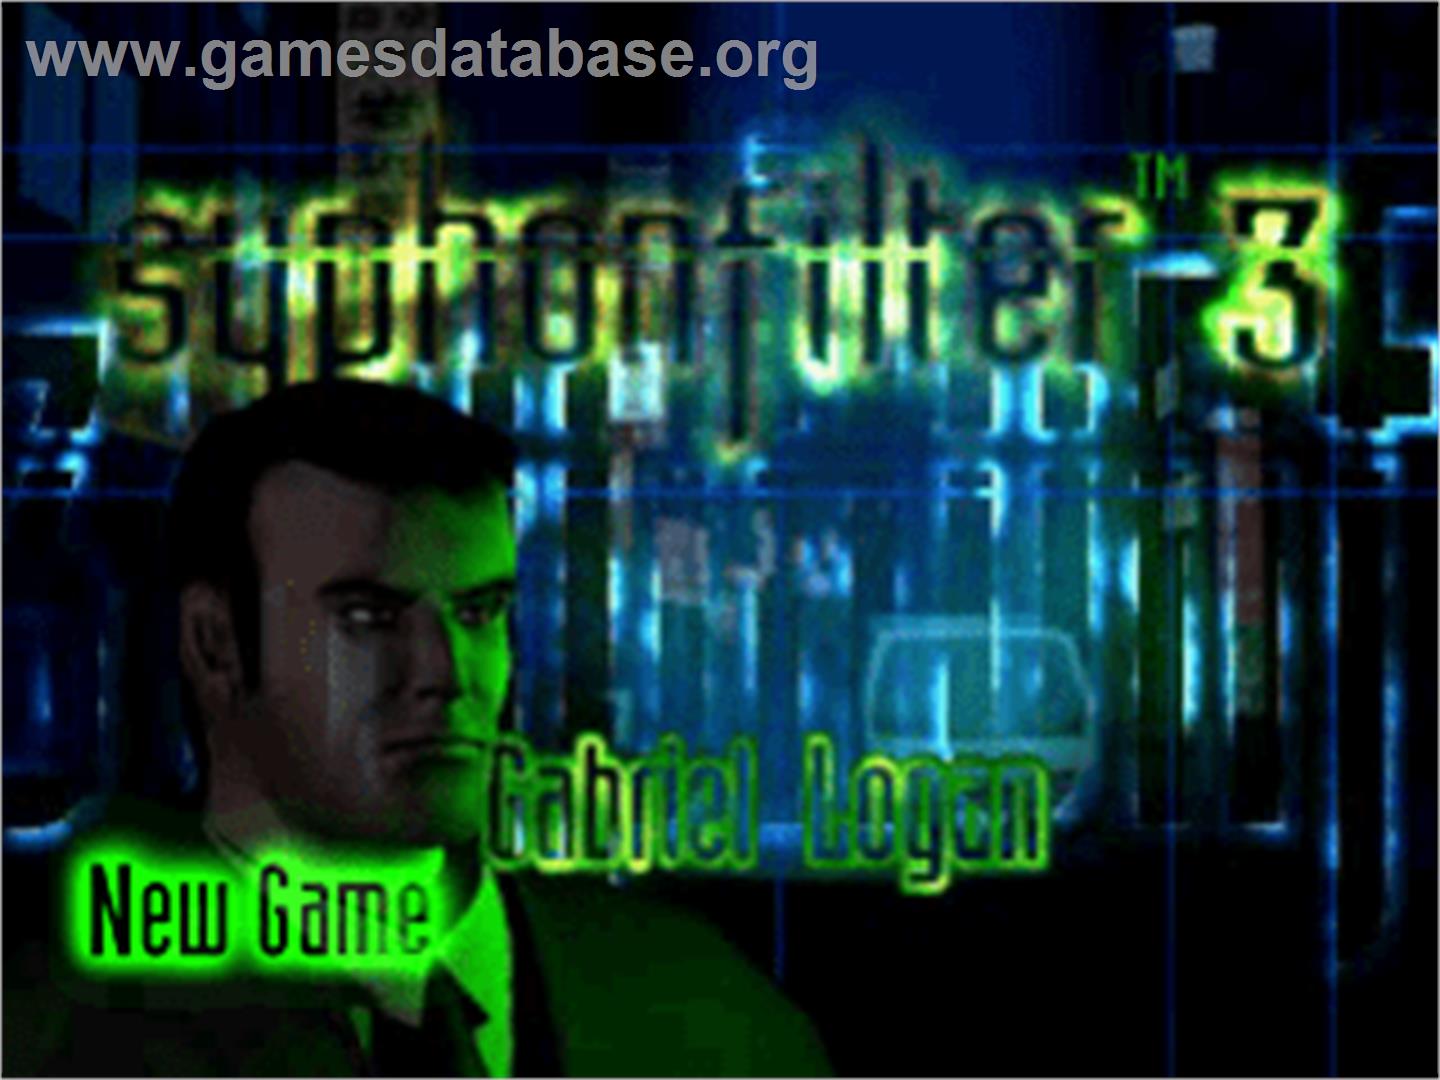 Syphon Filter 3 - Sony Playstation - Artwork - Title Screen